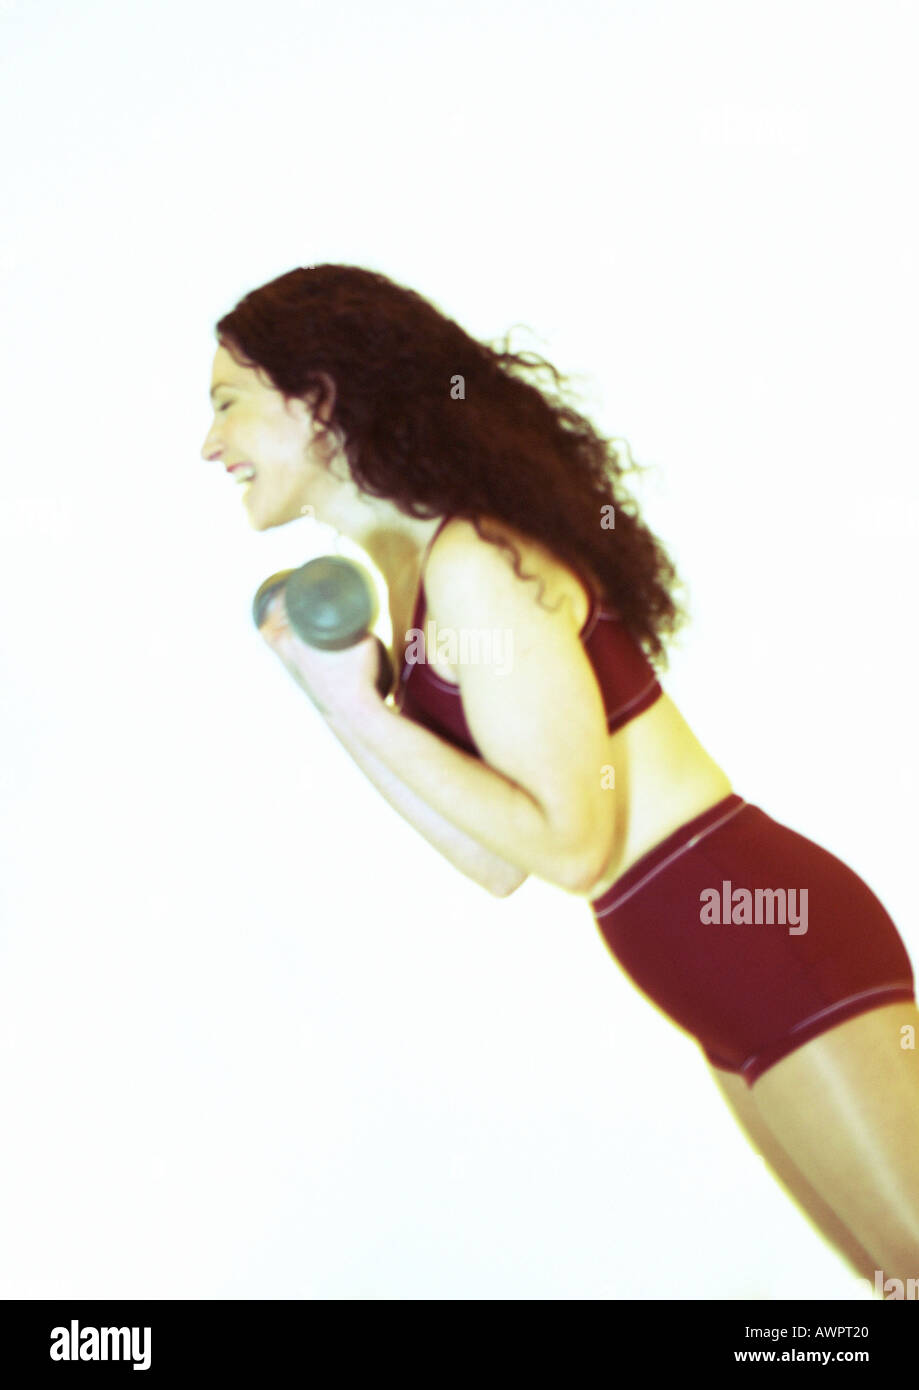 Woman lifting weights and laughing, side view Stock Photo